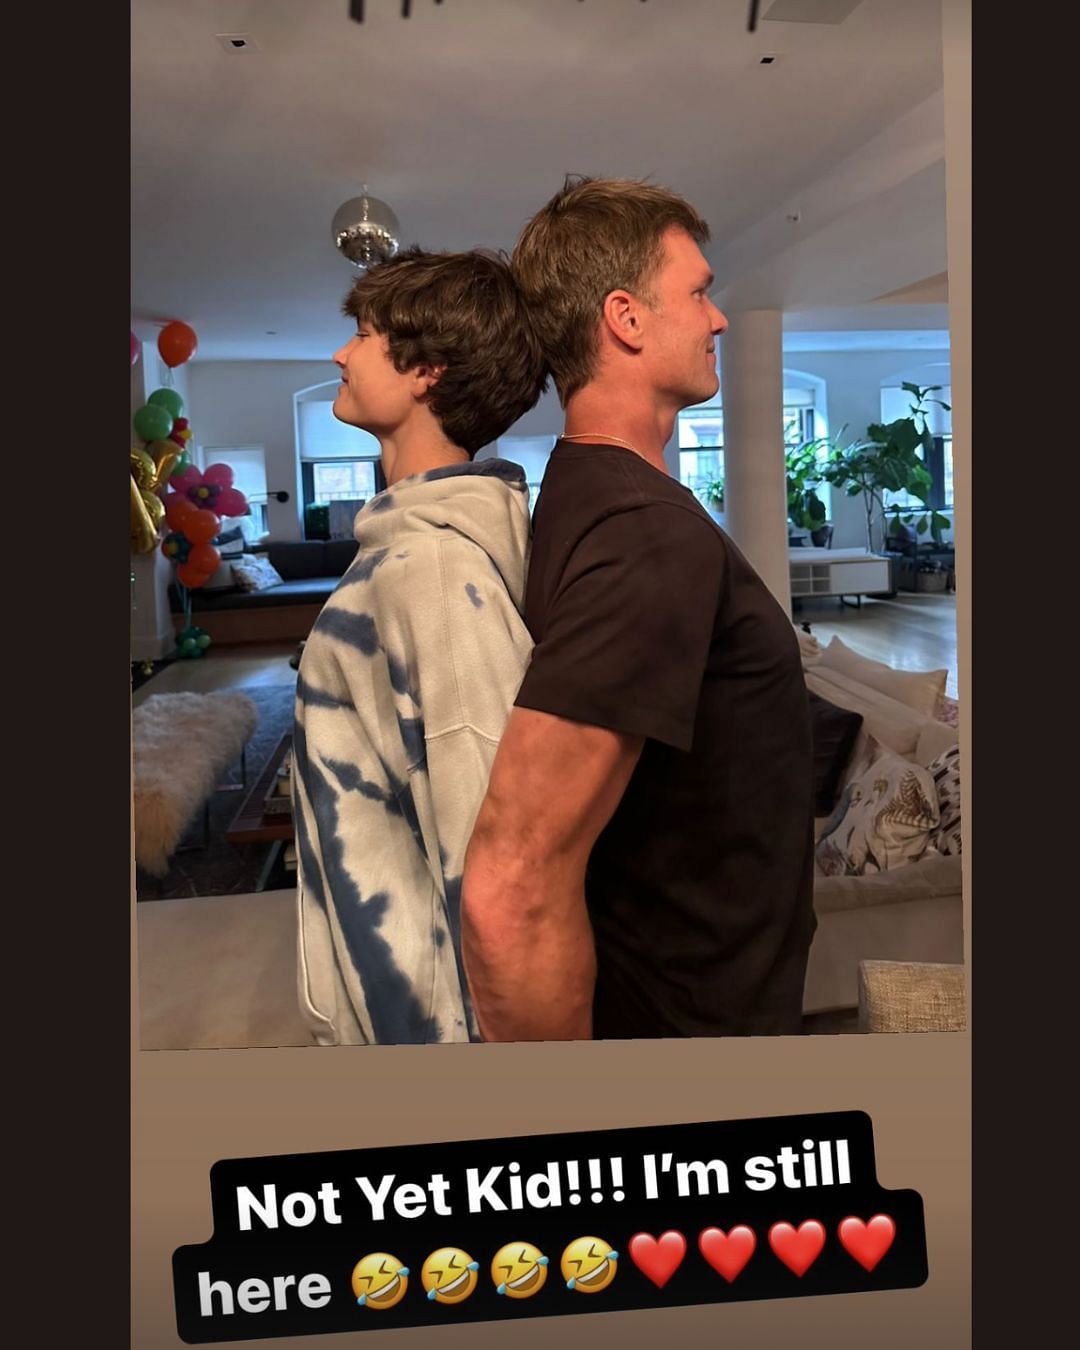 Brady with a message to his son as he&#039;s nearing his height. Credit: Tom Brady&#039;s IG